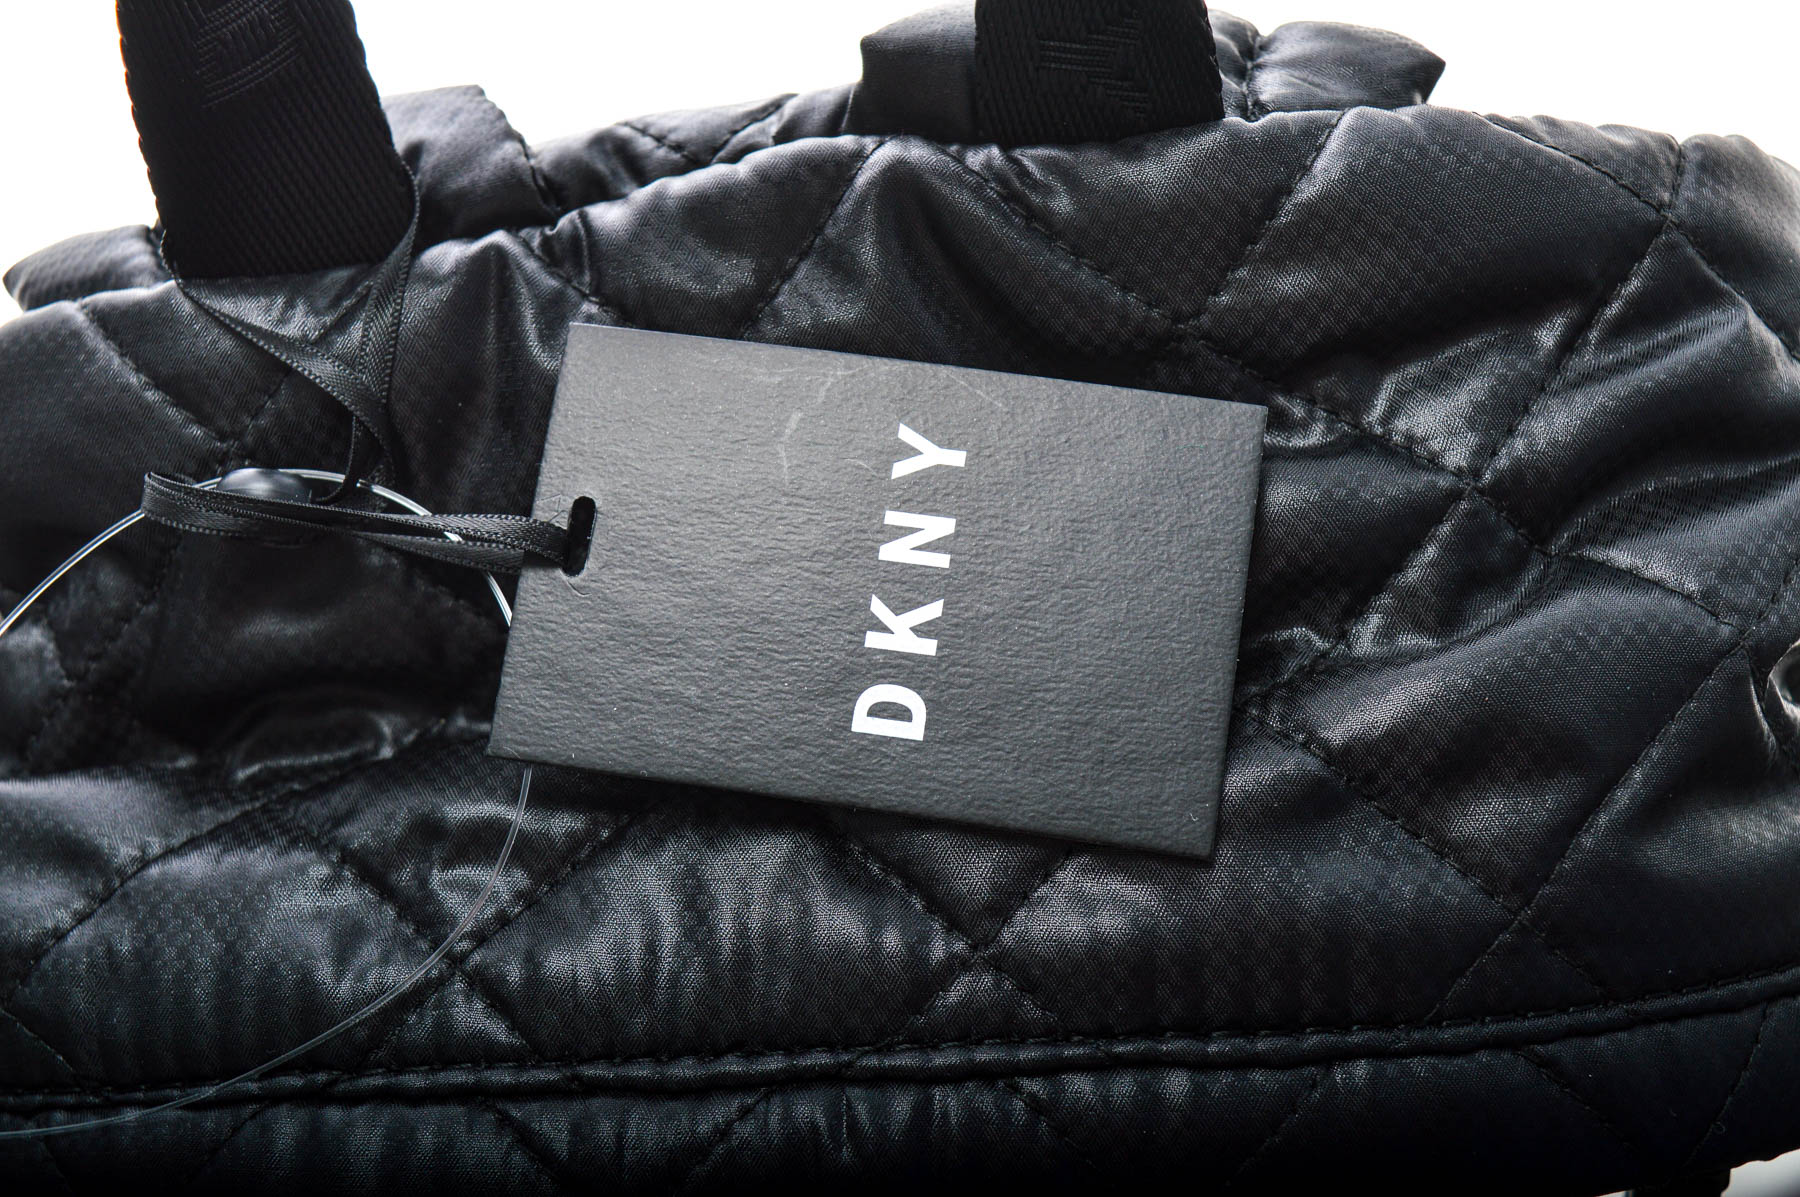 Woman's backpack - DKNY - 3